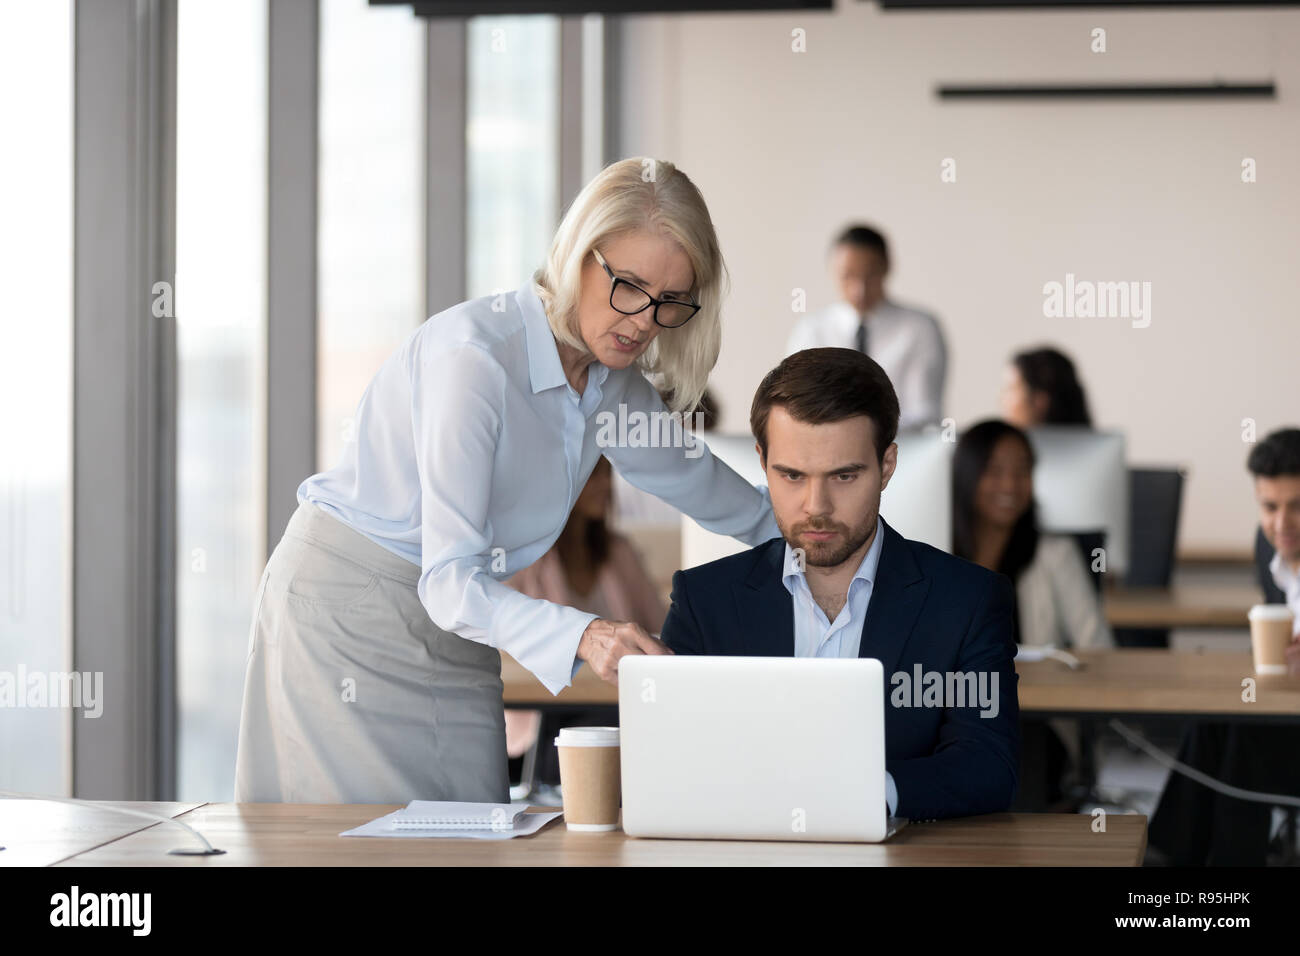 Middle aged executive manager helping to male colleague Stock Photo